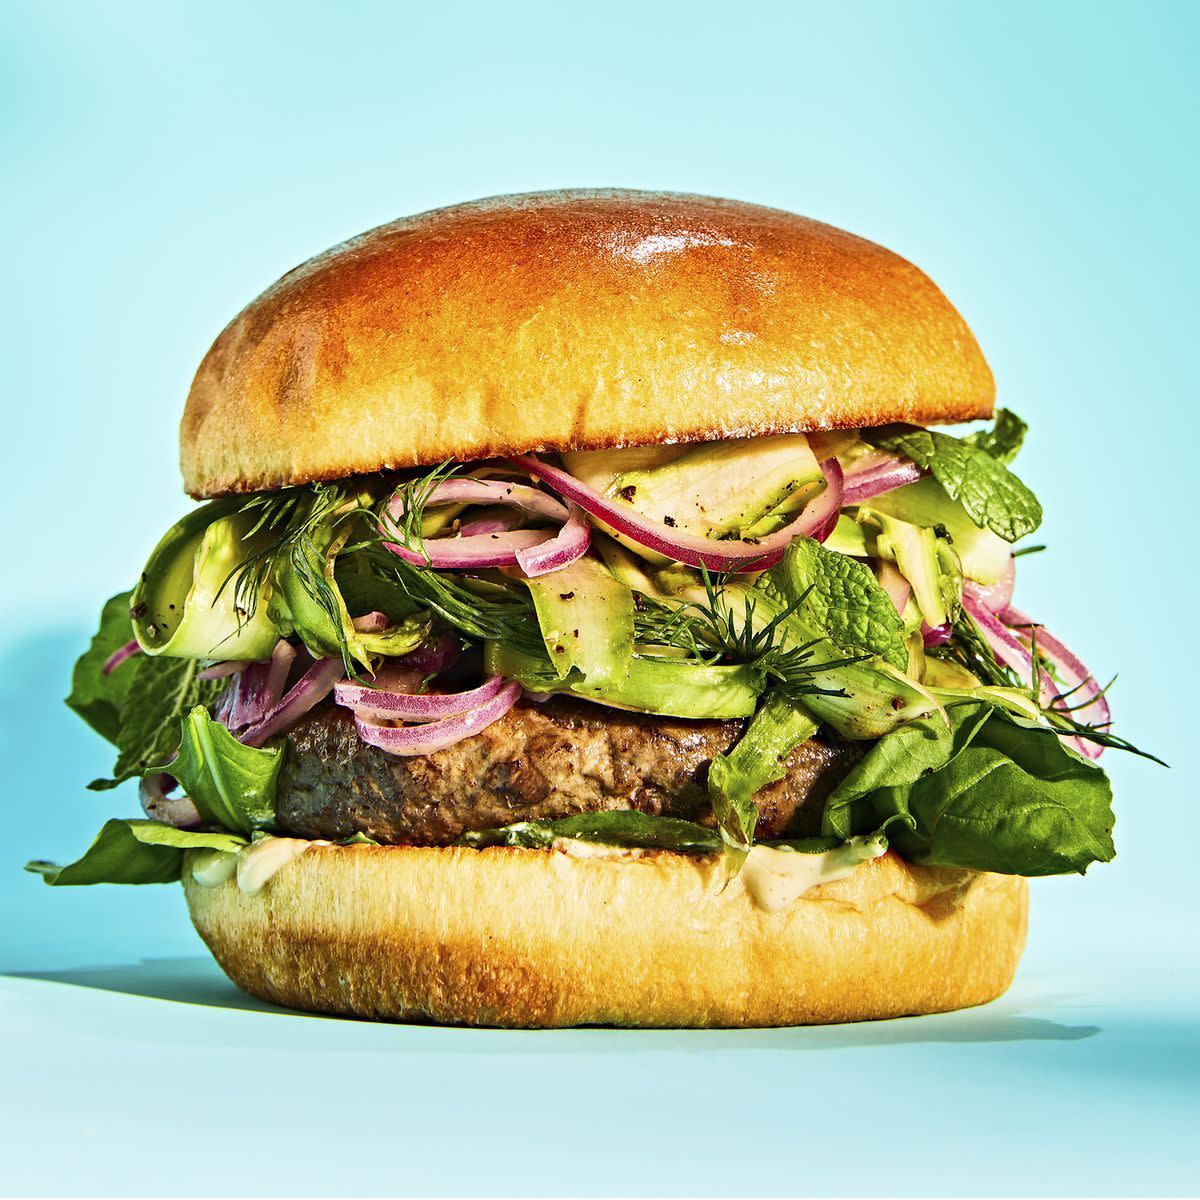 mushroom and beef blended burger recipe with shaved asparagus salad